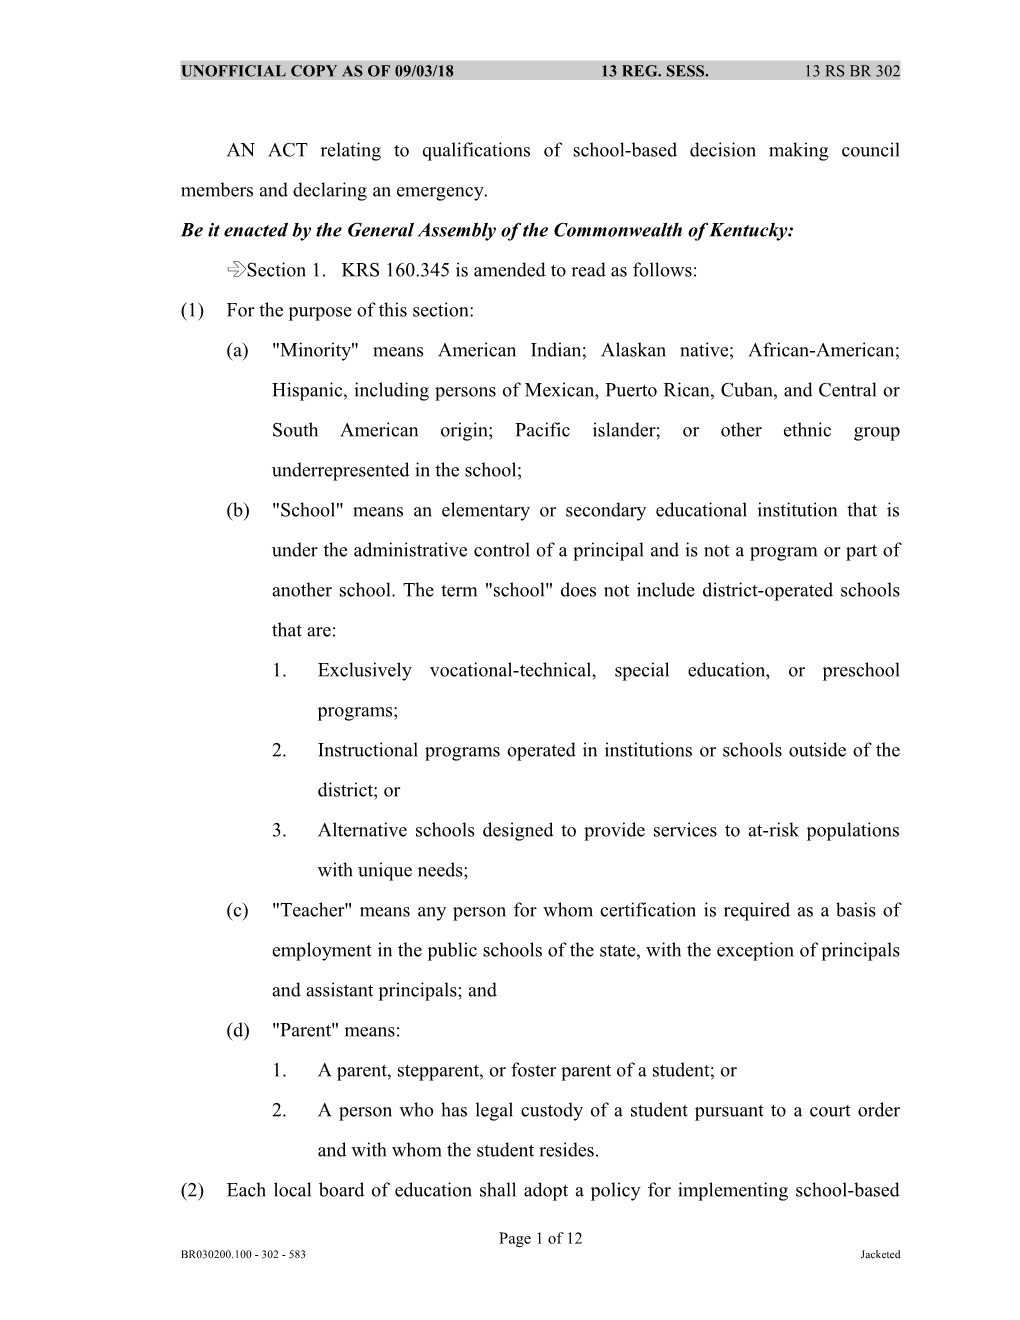 AN ACT Relating to Qualifications of School-Based Decision Making Council Members and Declaring